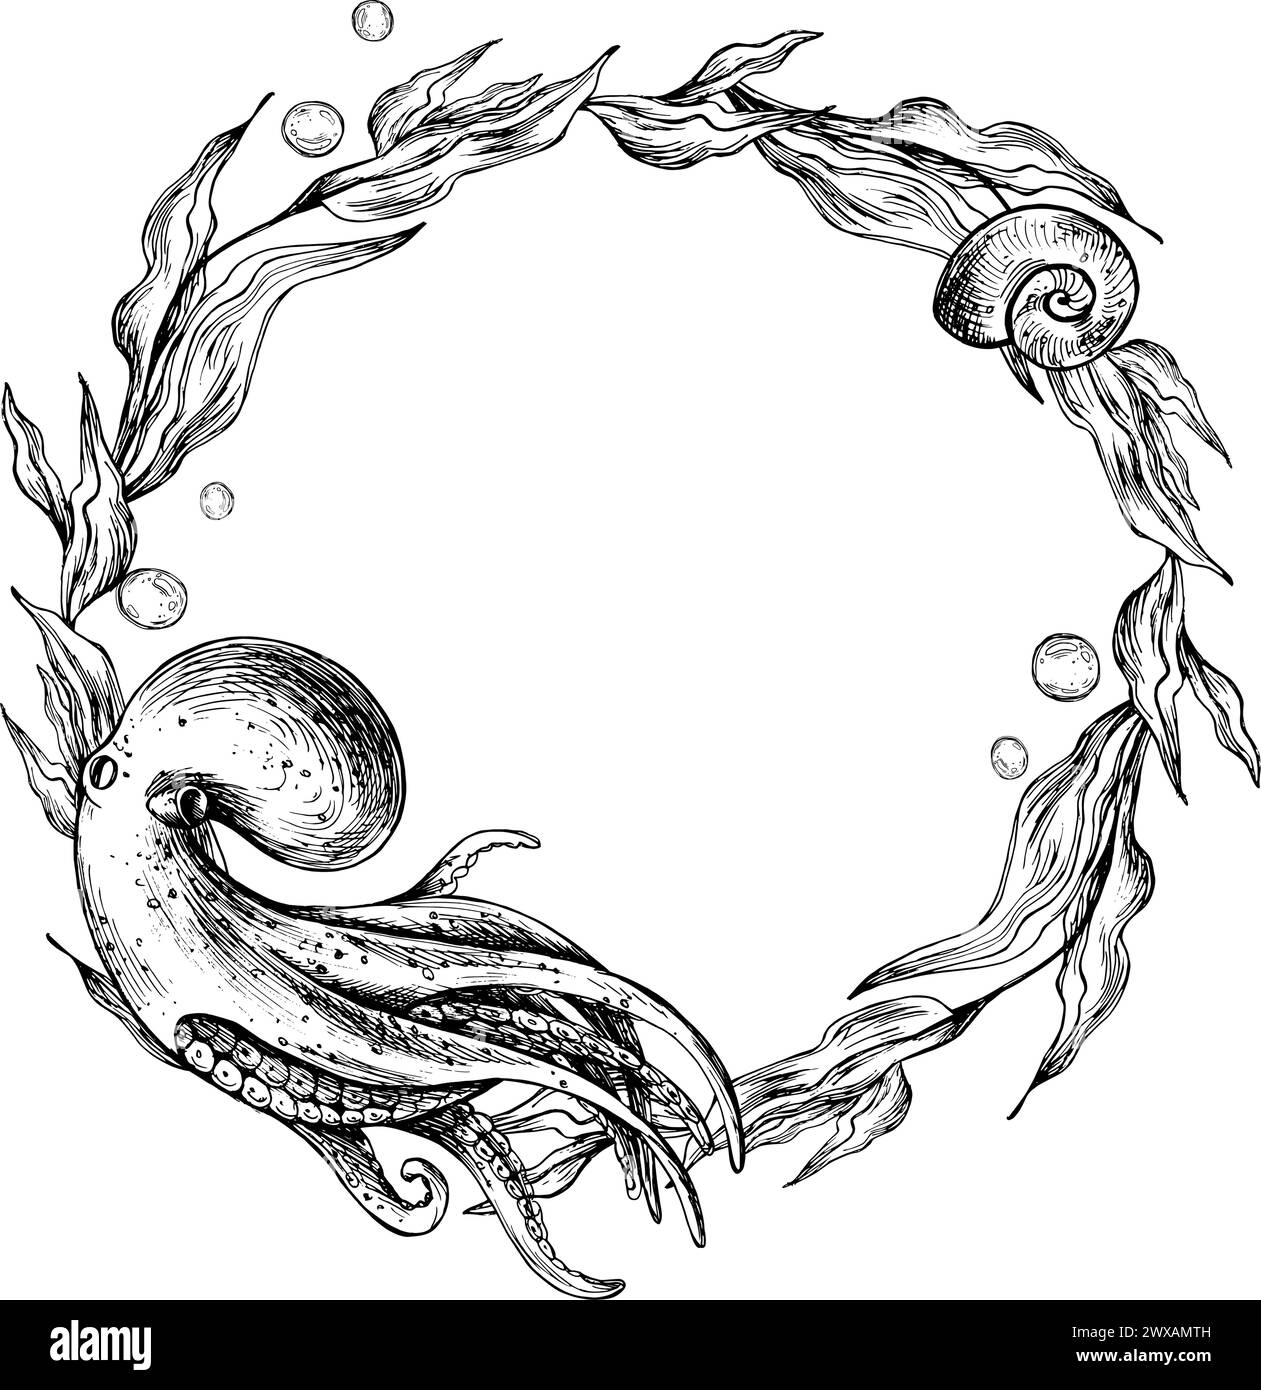 Underwater world clipart with sea animals octopus, jellyfish coral and algae. Graphic illustration hand drawn in black ink. Circle wreath, frame EPS Stock Vector